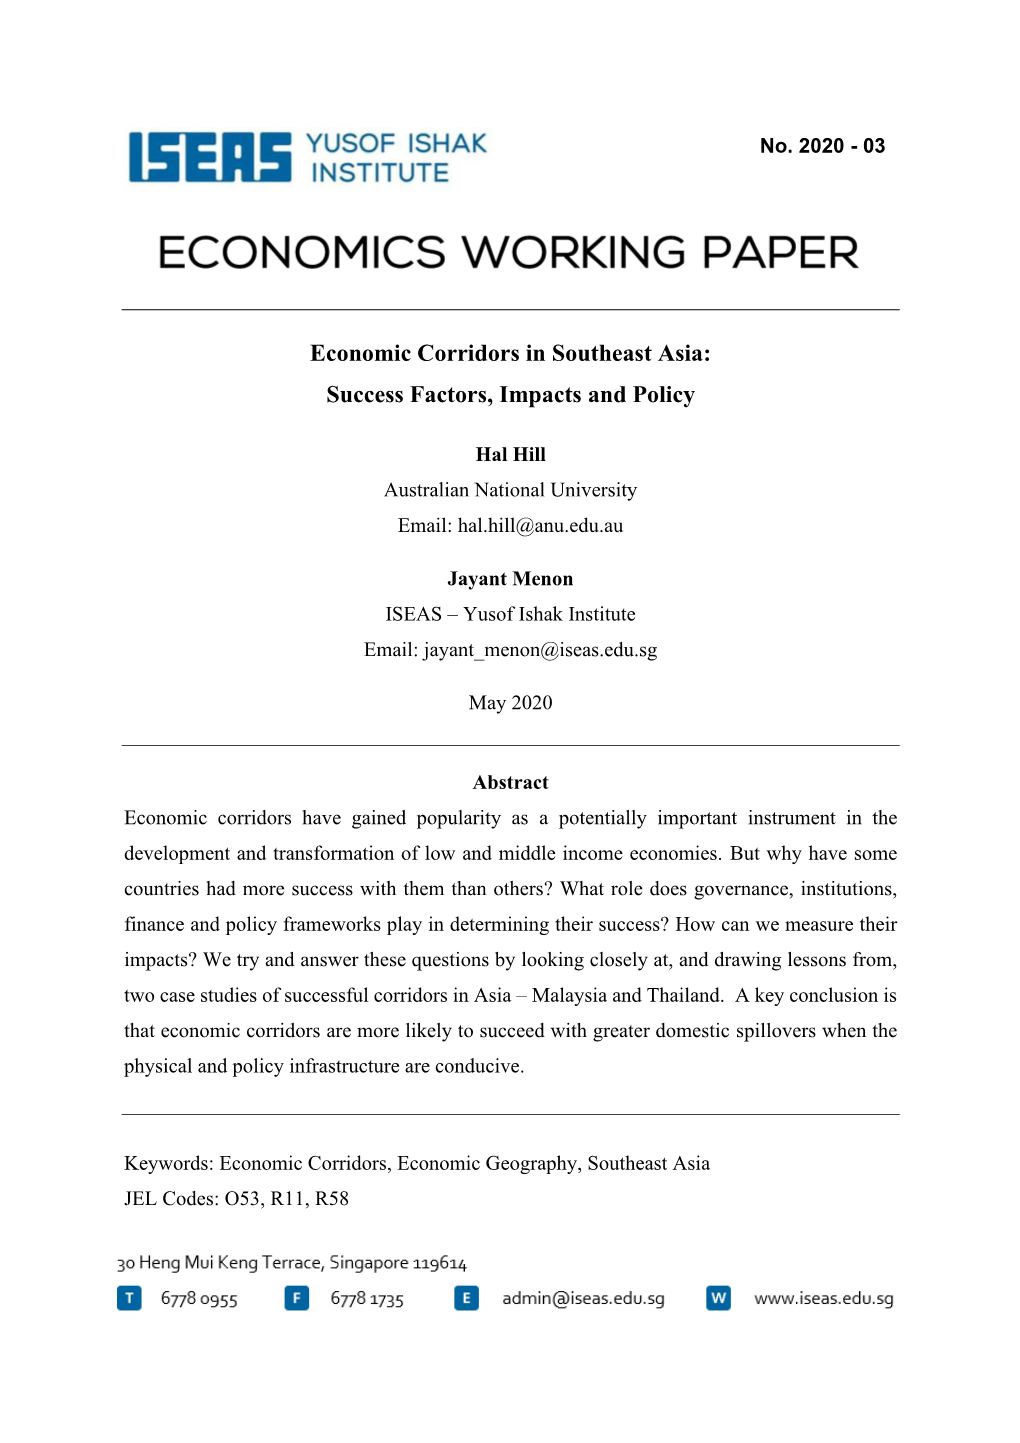 Economic Corridors in Southeast Asia: Success Factors, Impacts and Policy